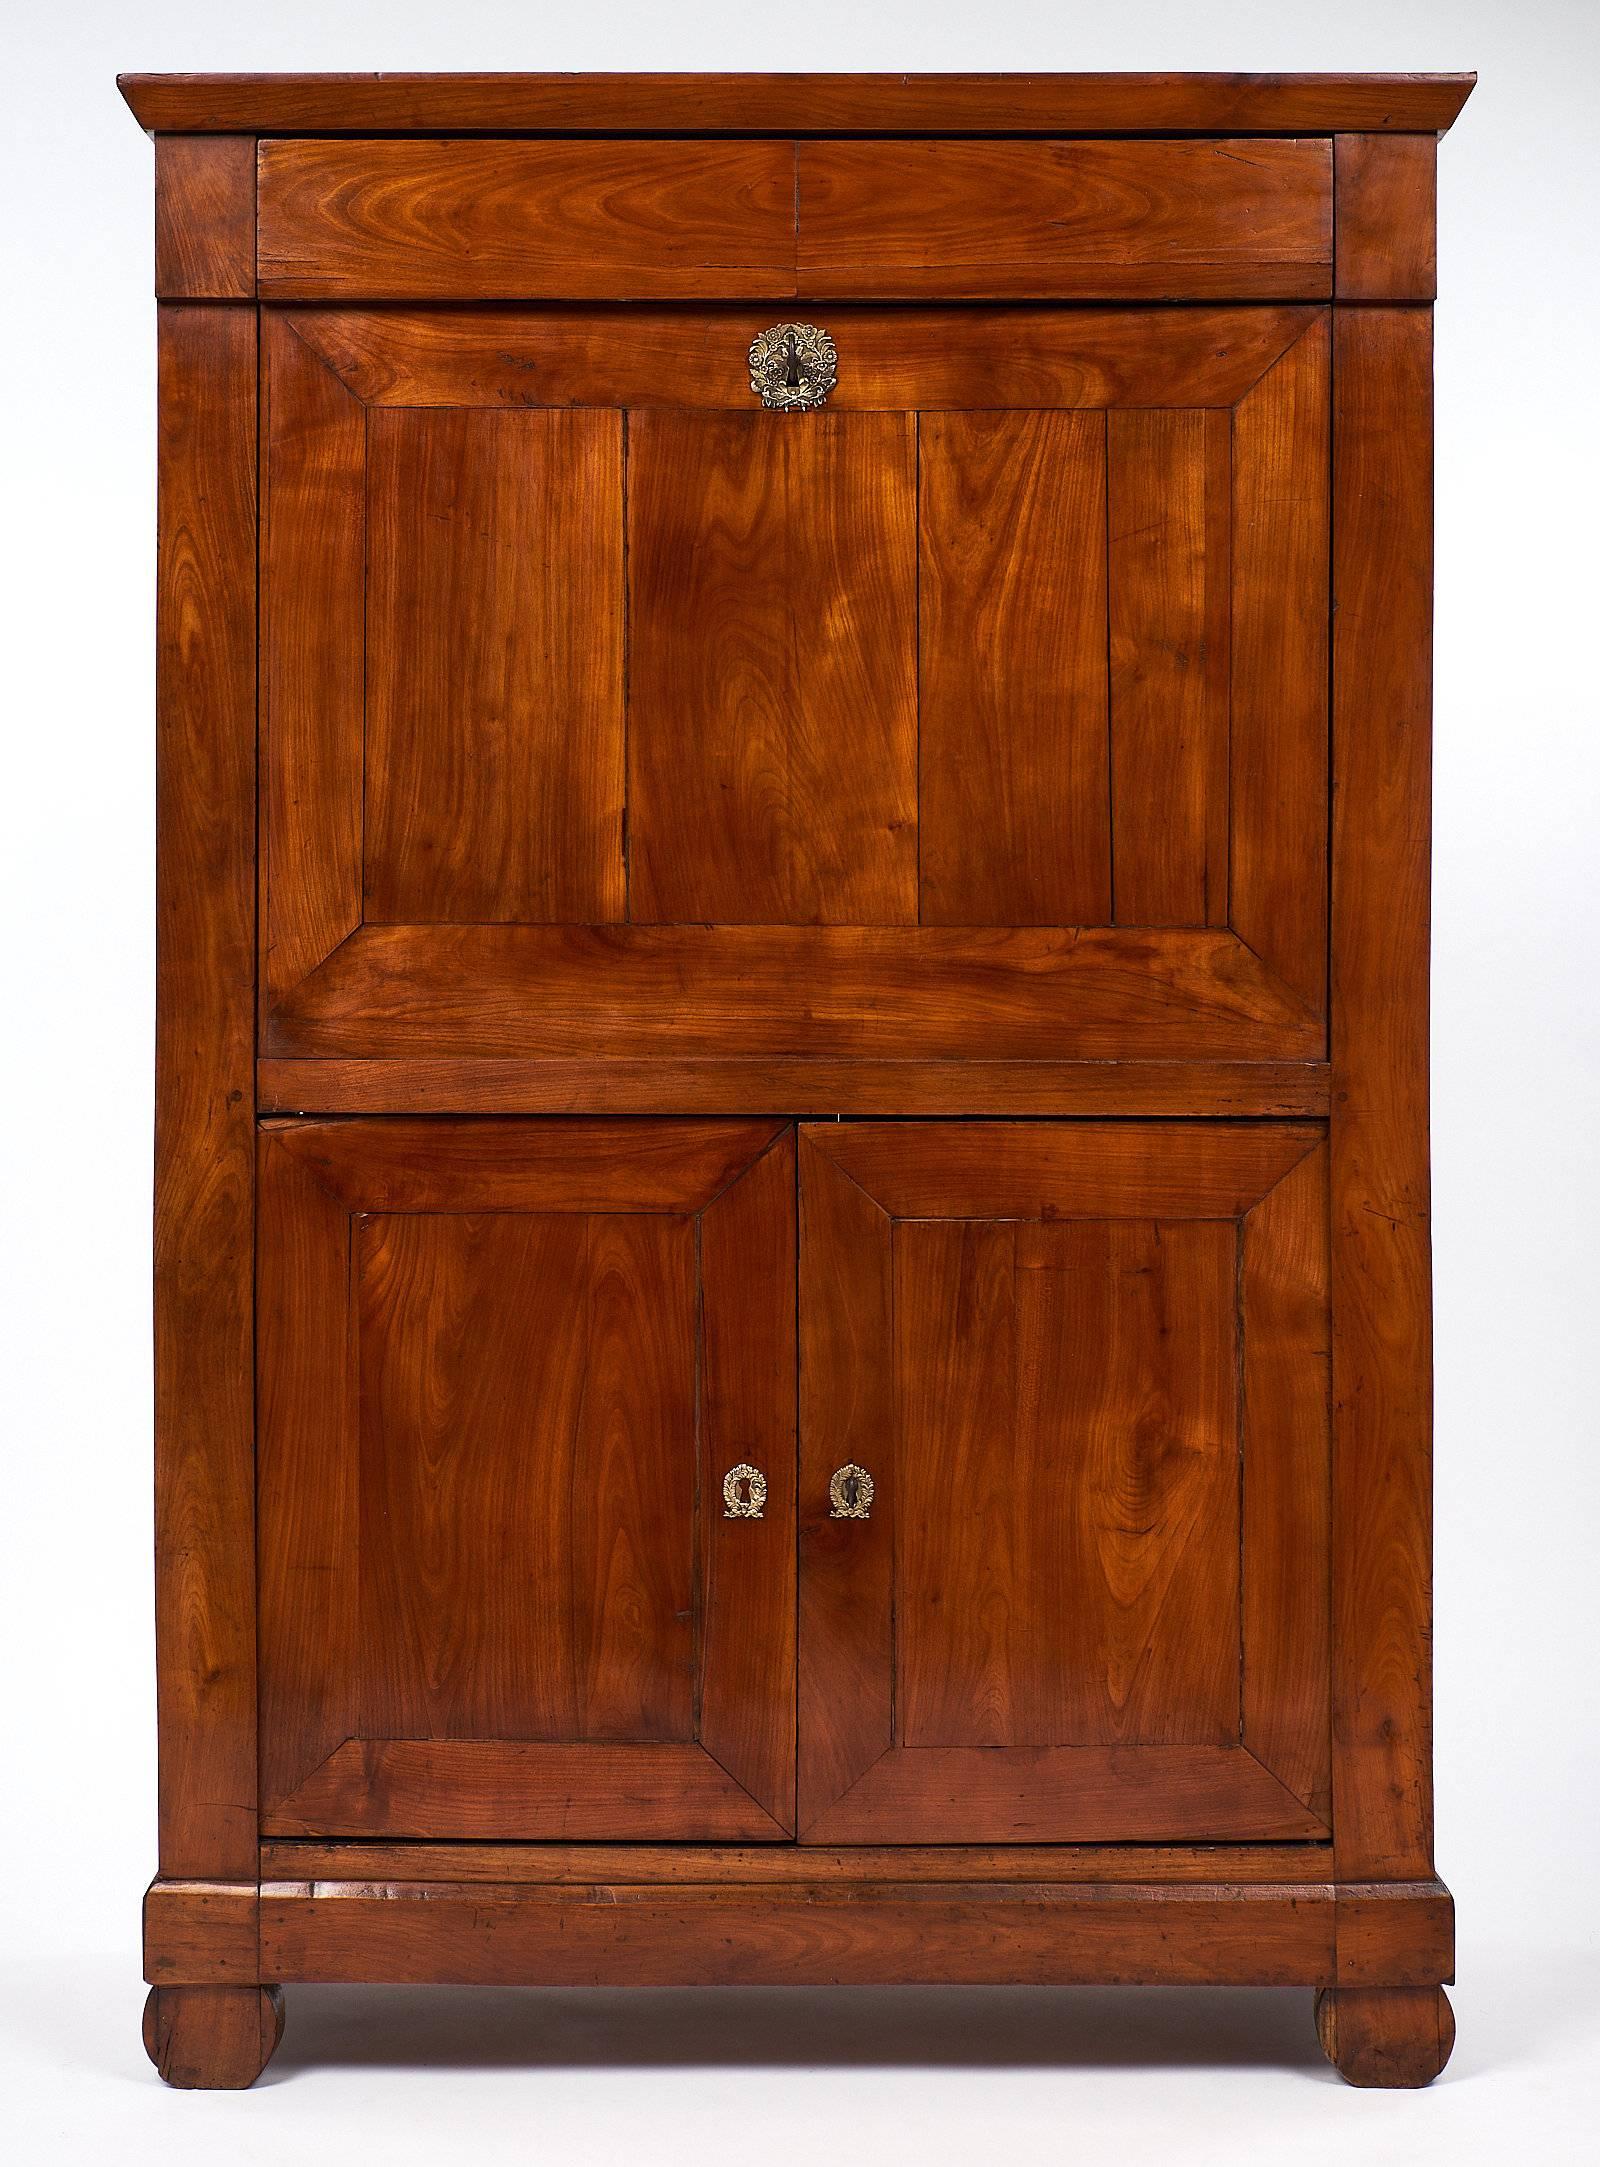 French antique secrétaire made of solid cherrywood, this piece has a Provincial Directoire drop front, a top dovetailed drawer, and two doors below. The interior features nicely curved shelving and five dovetailed drawers. The writing surface is